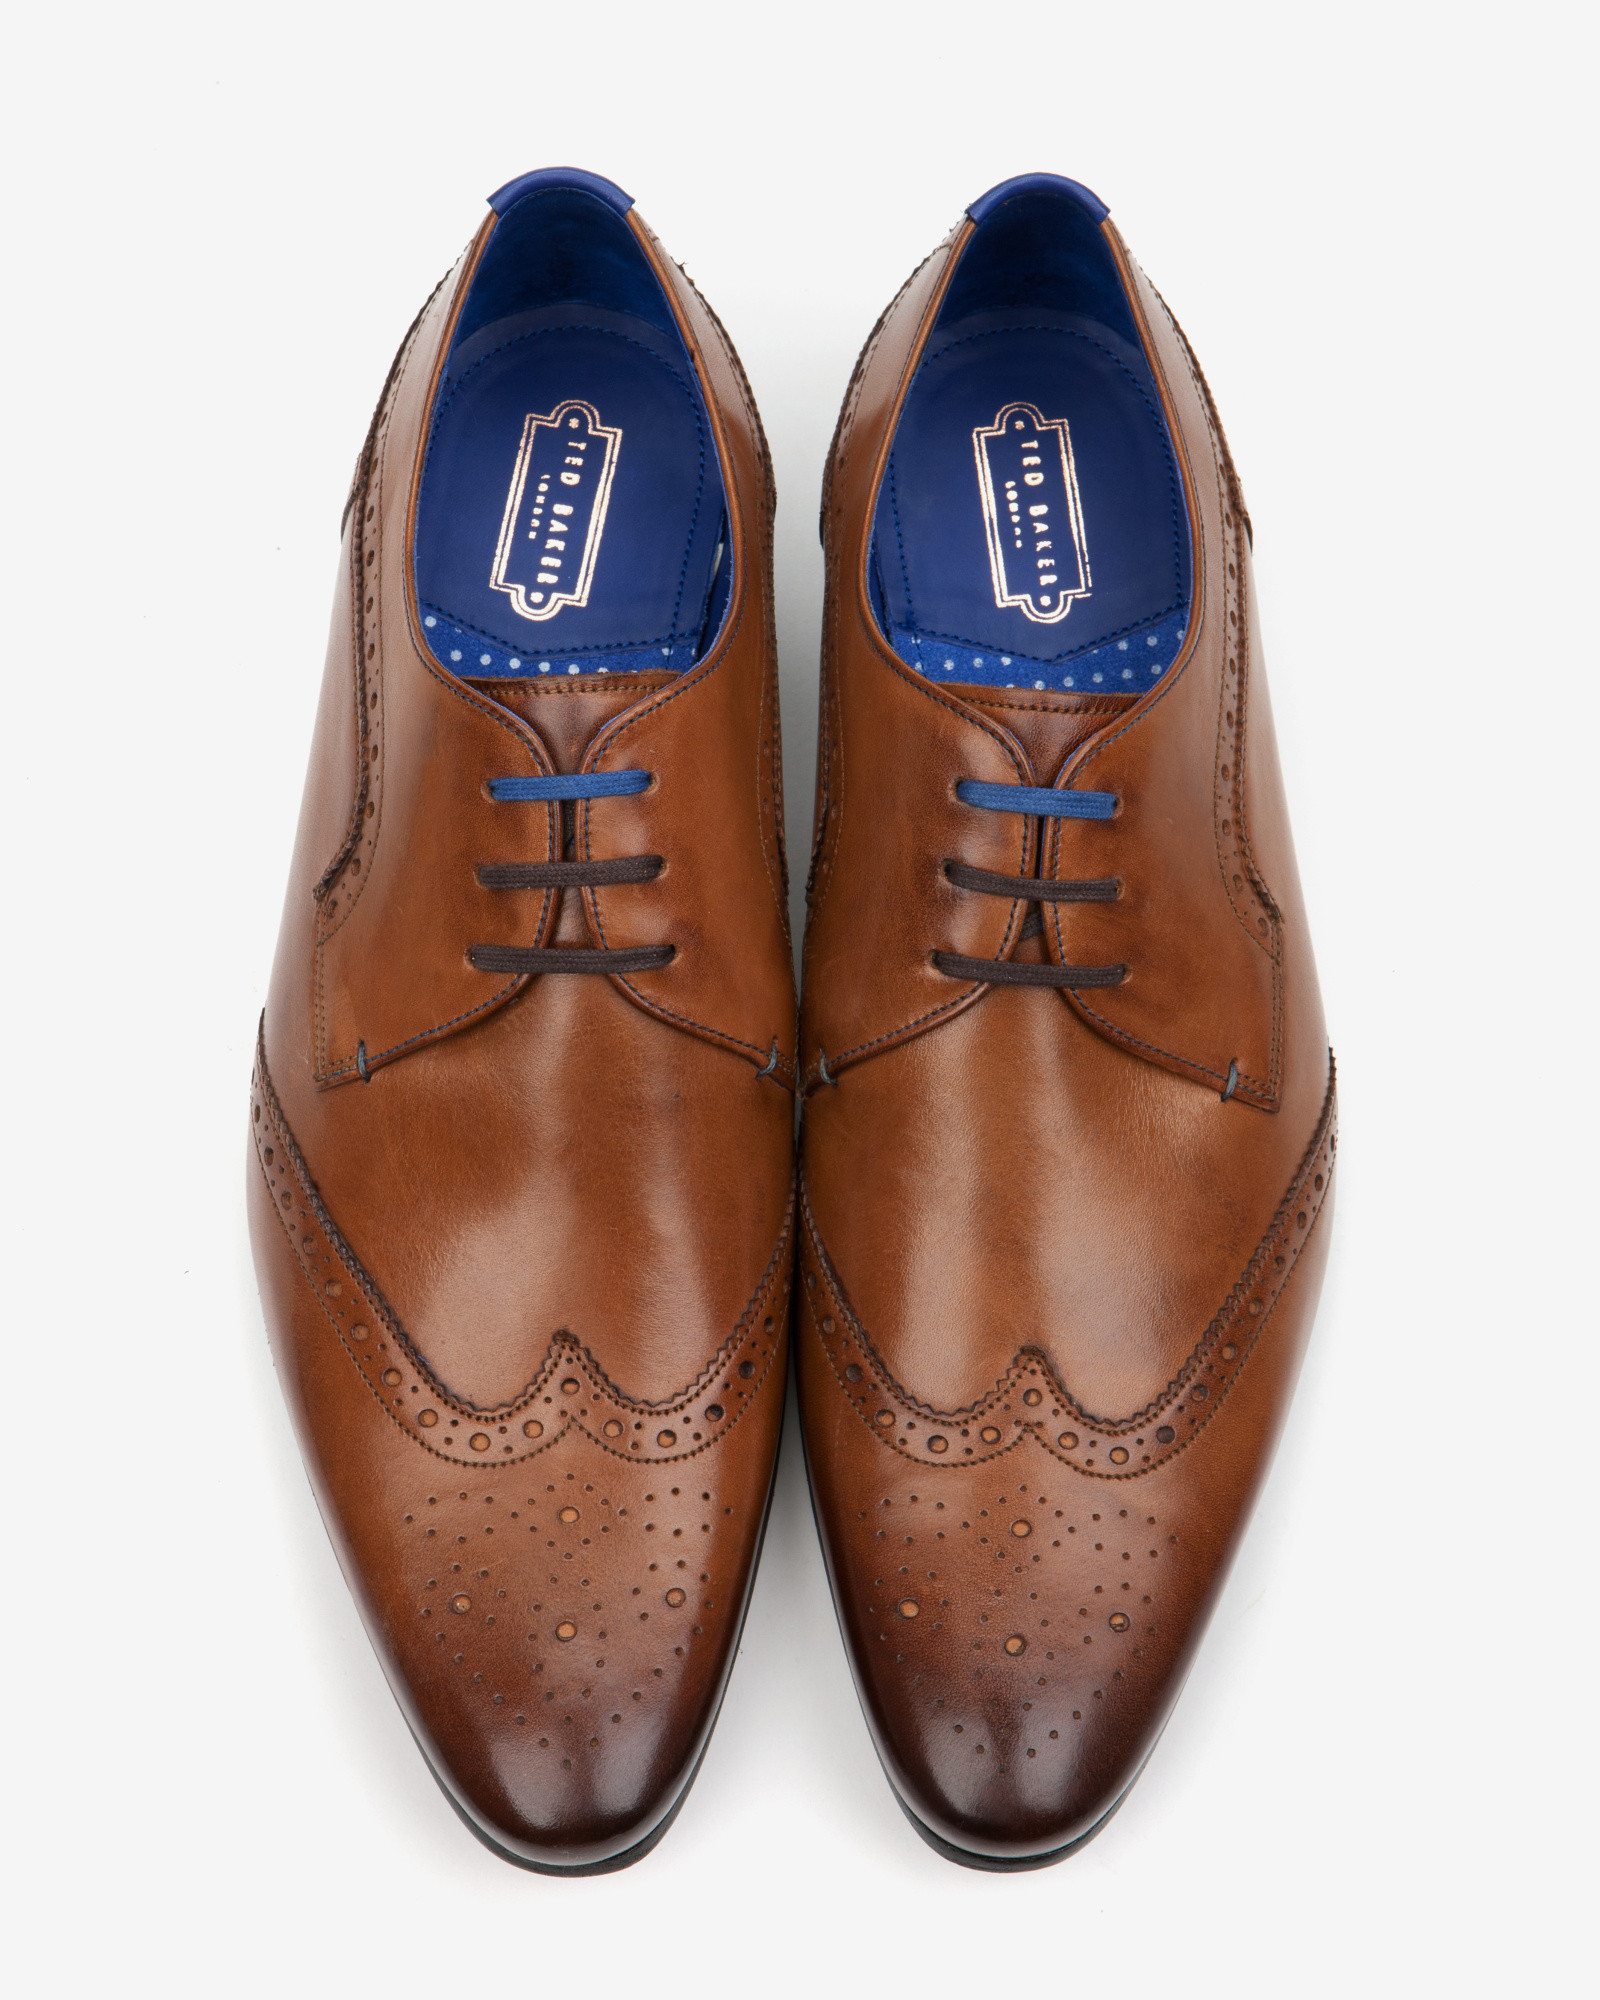 ted-baker-tan-leather-wingtip-derby-brogues-brown-product-0-287299443-normal.jpeg